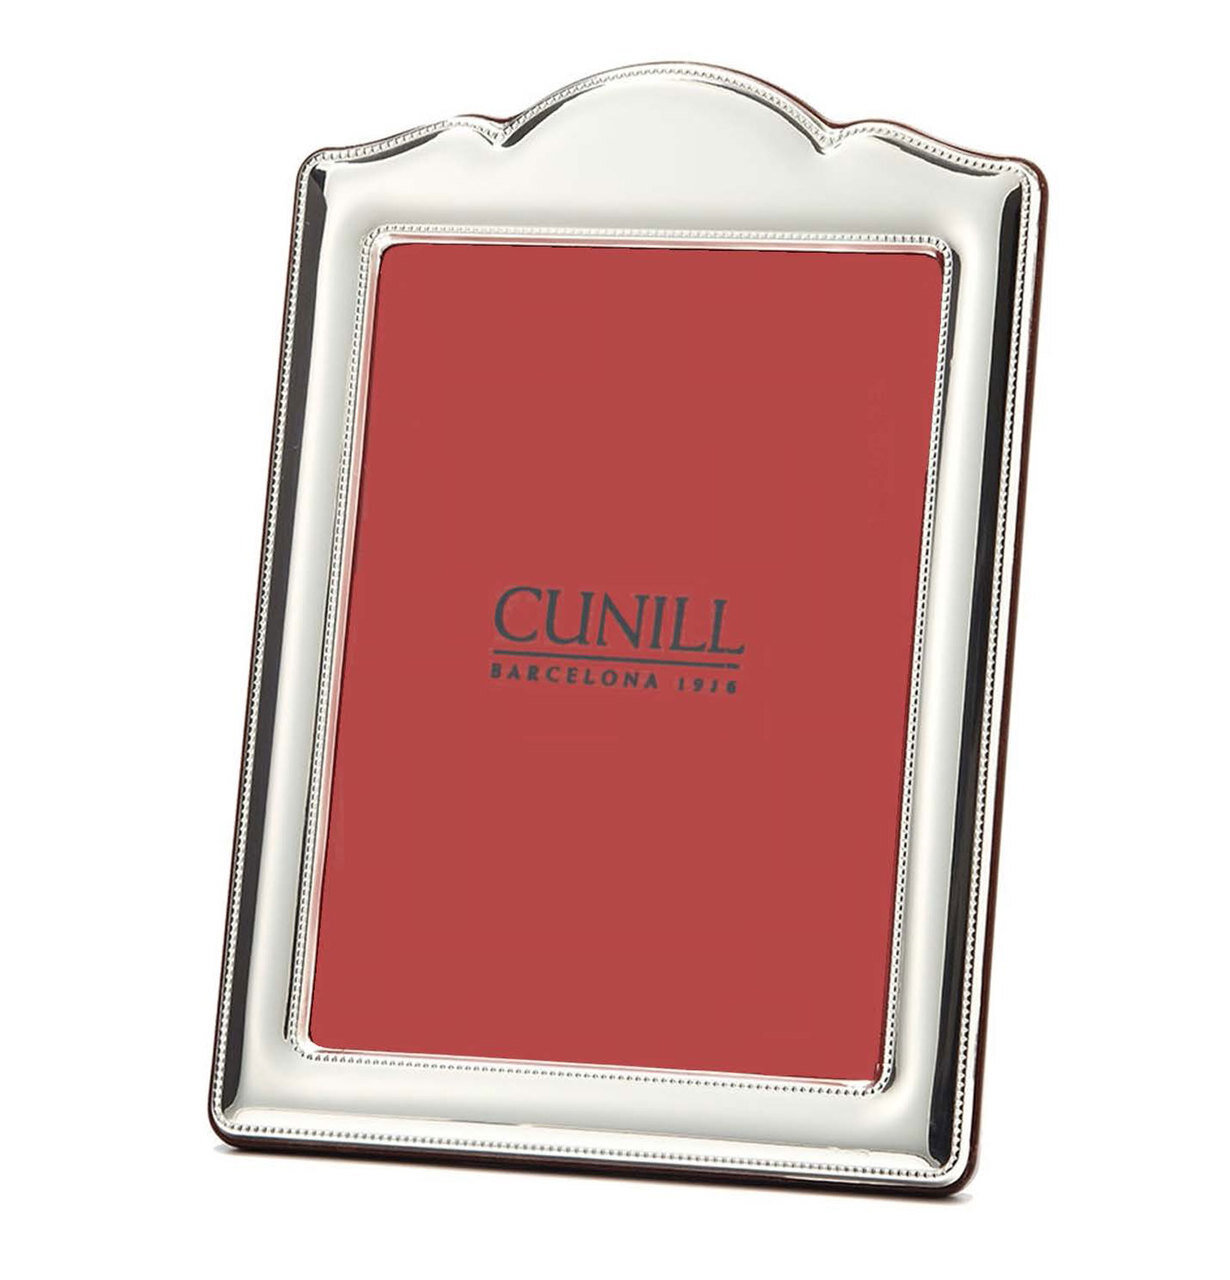 Cunill Anniversary 4 x 6 Inch Picture Frame - Sterling Silver